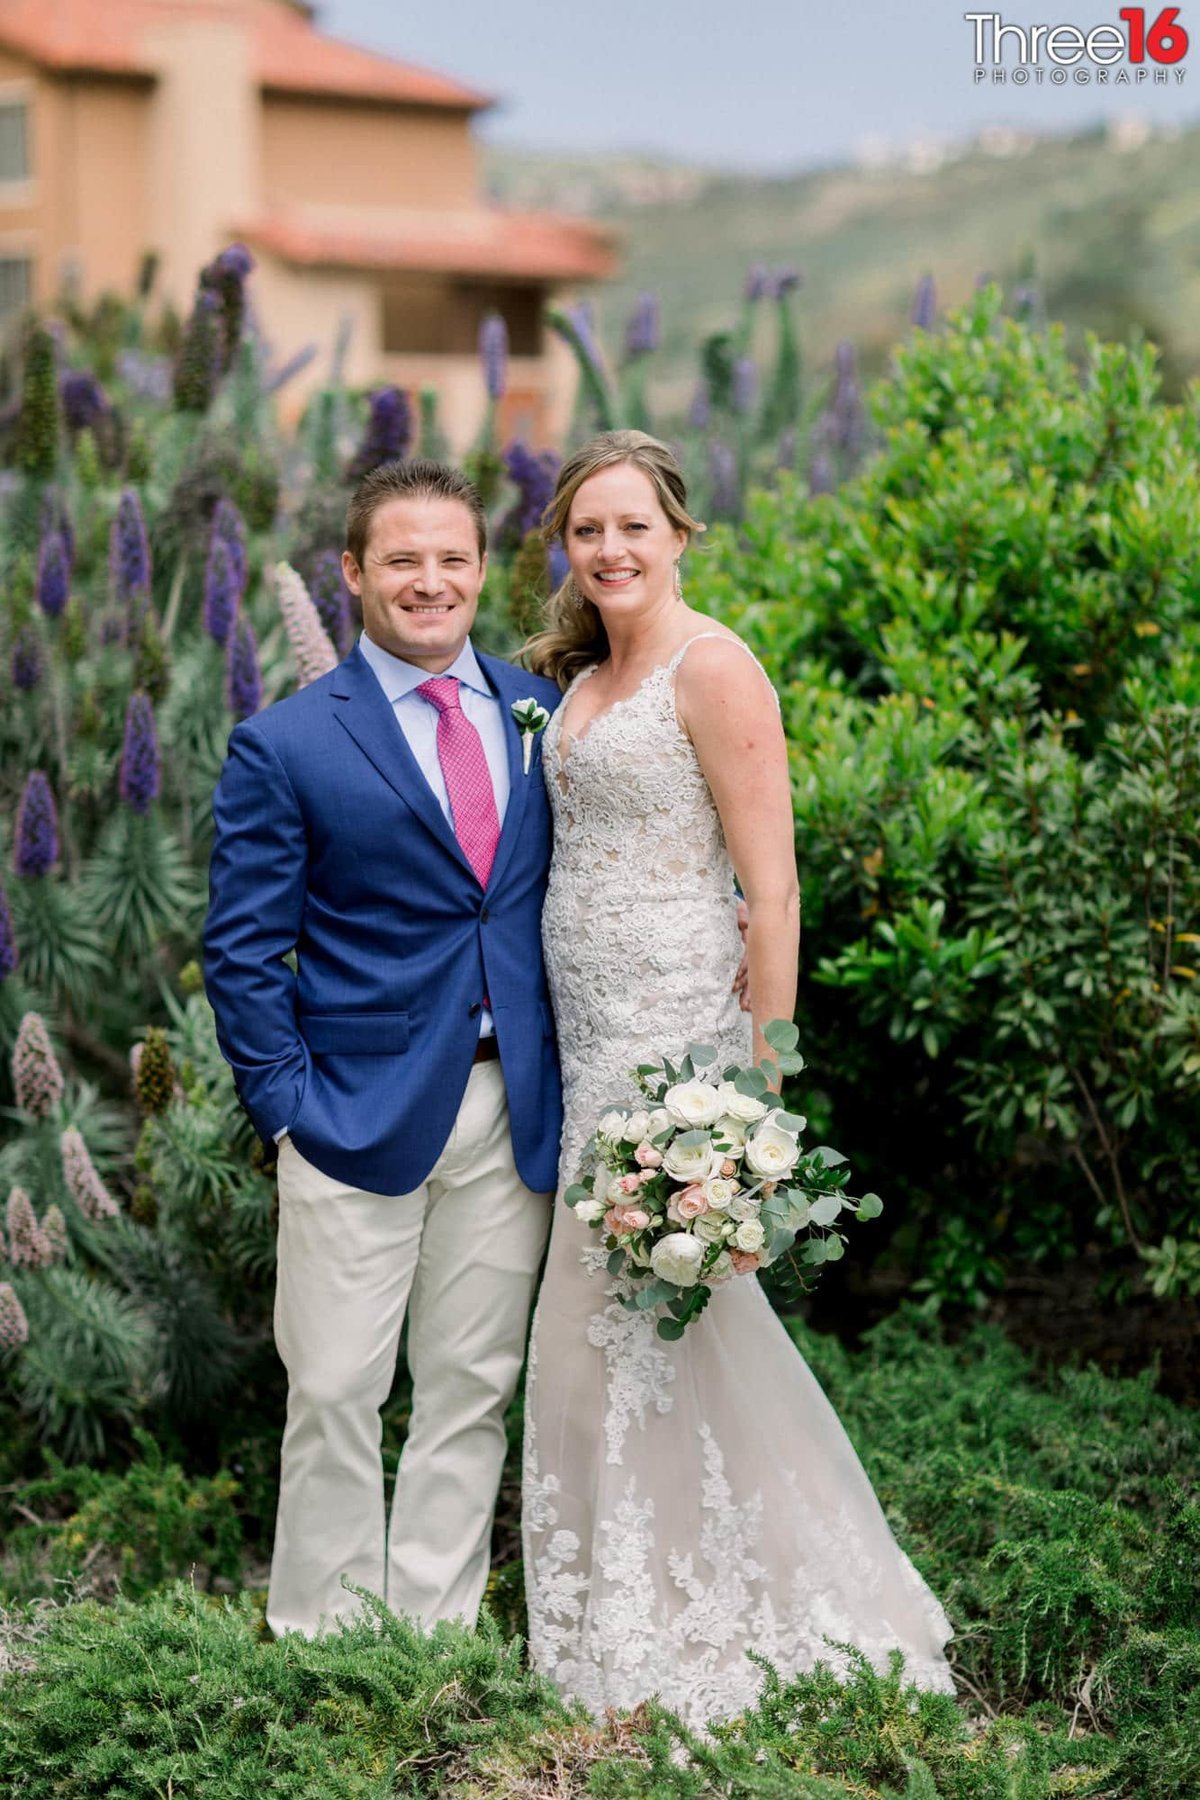 Bride and Groom pose with beautiful green shrubbery behind them